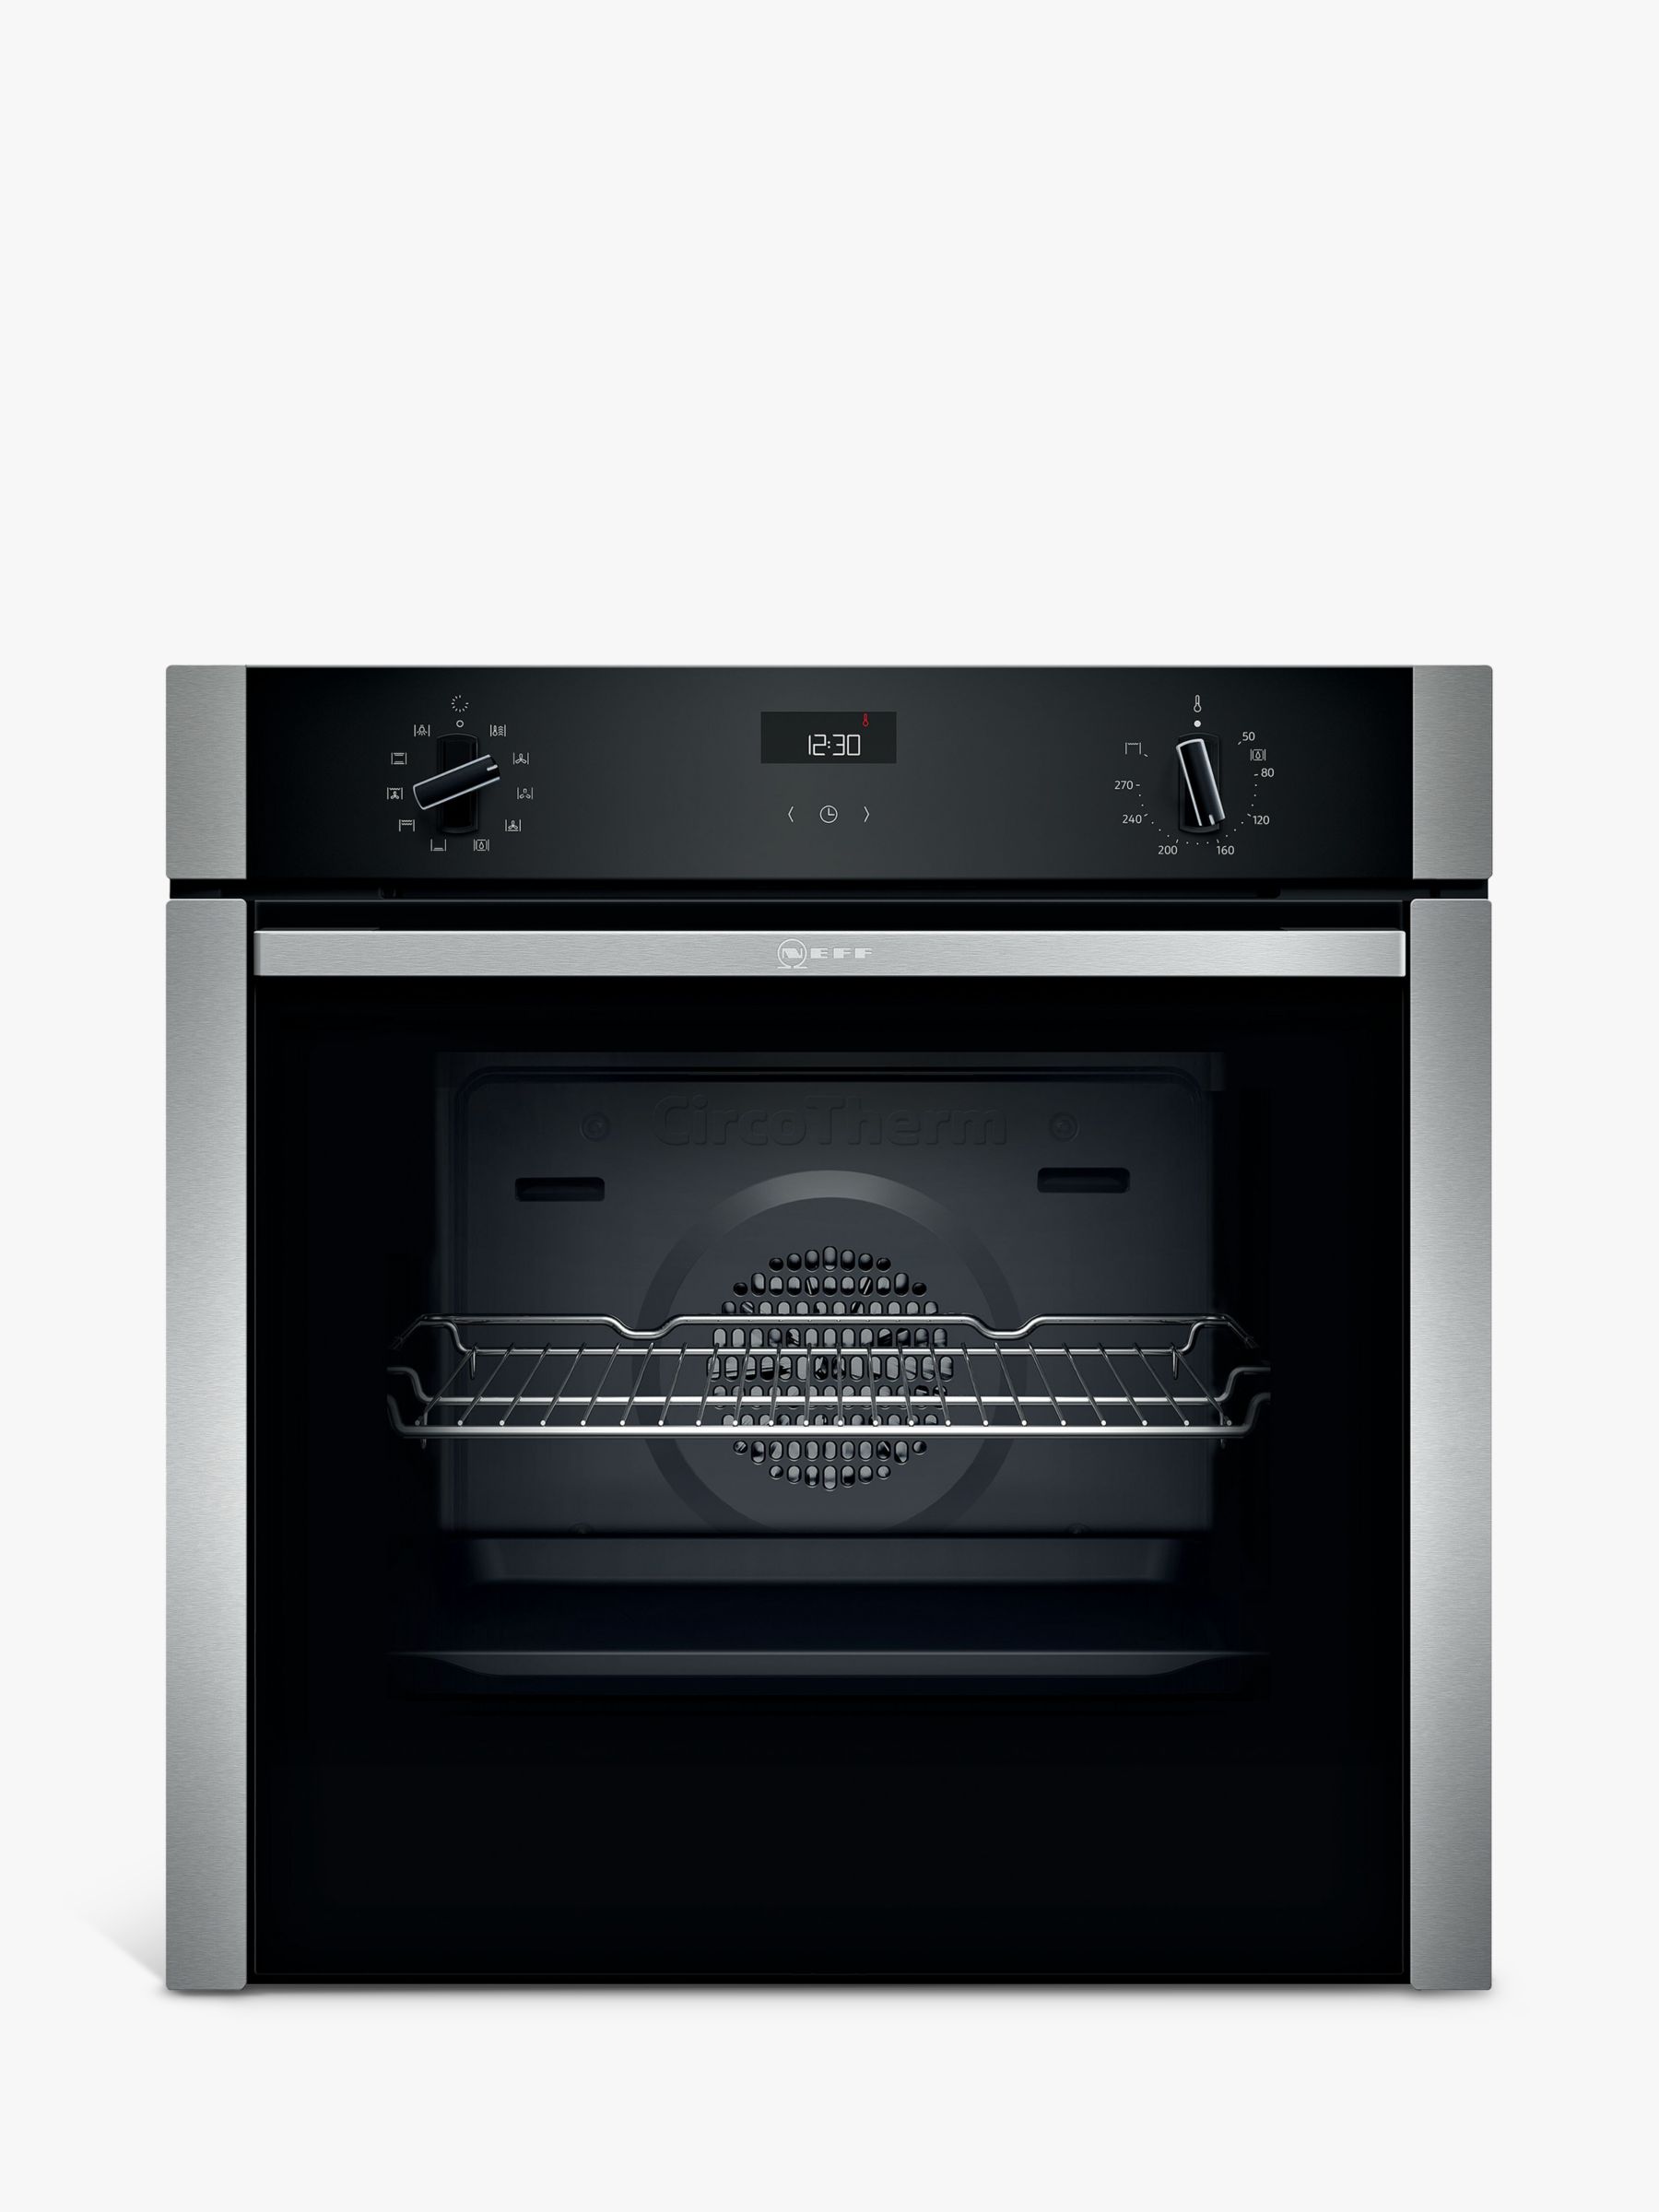 Neff N50 Slide and Hide B3ACE4HN0B Built In Electric Single Oven, Stainless Steel